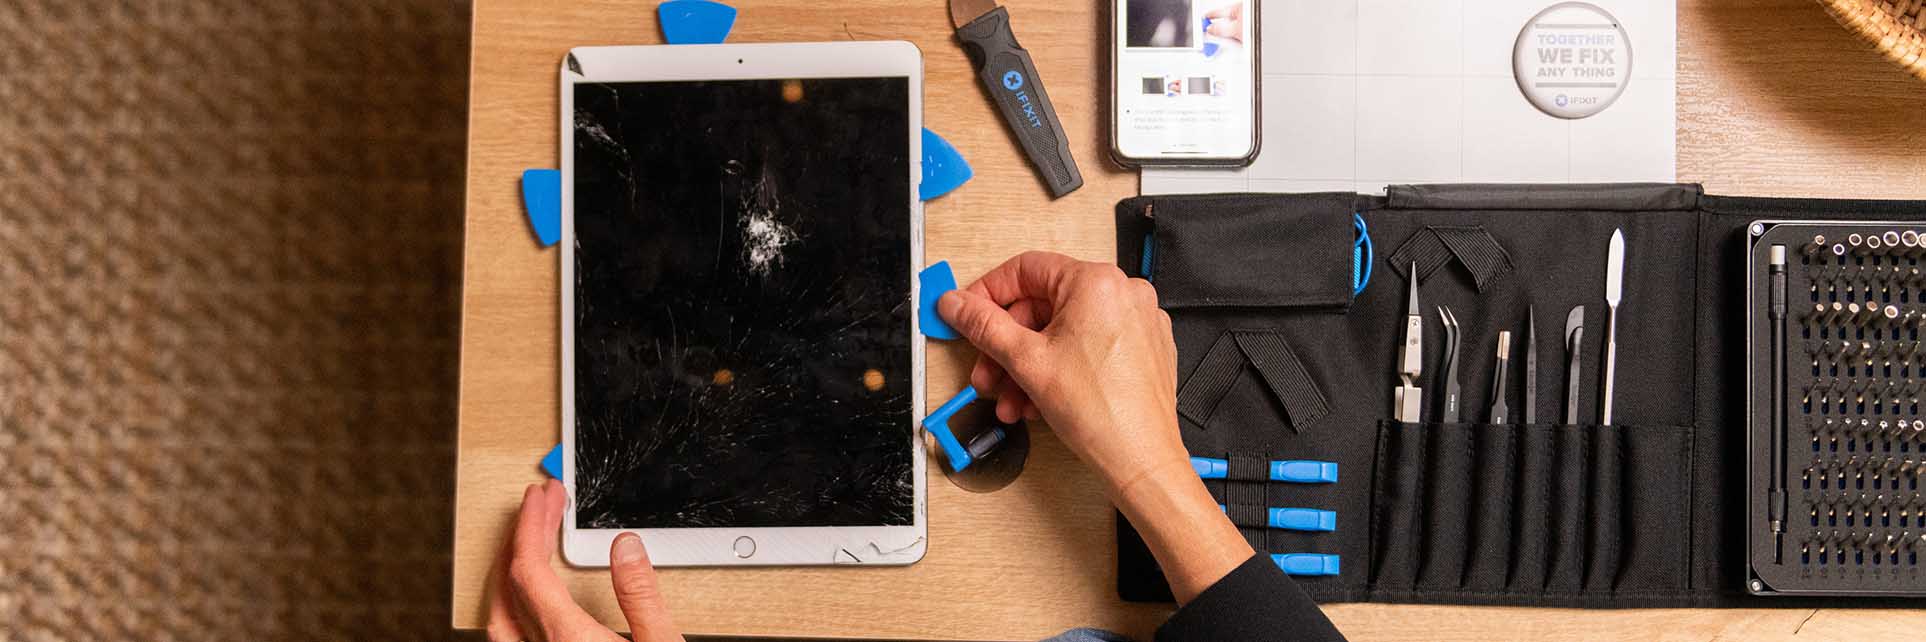 California Just Became the Third State to Pass Electronics Right to Repair